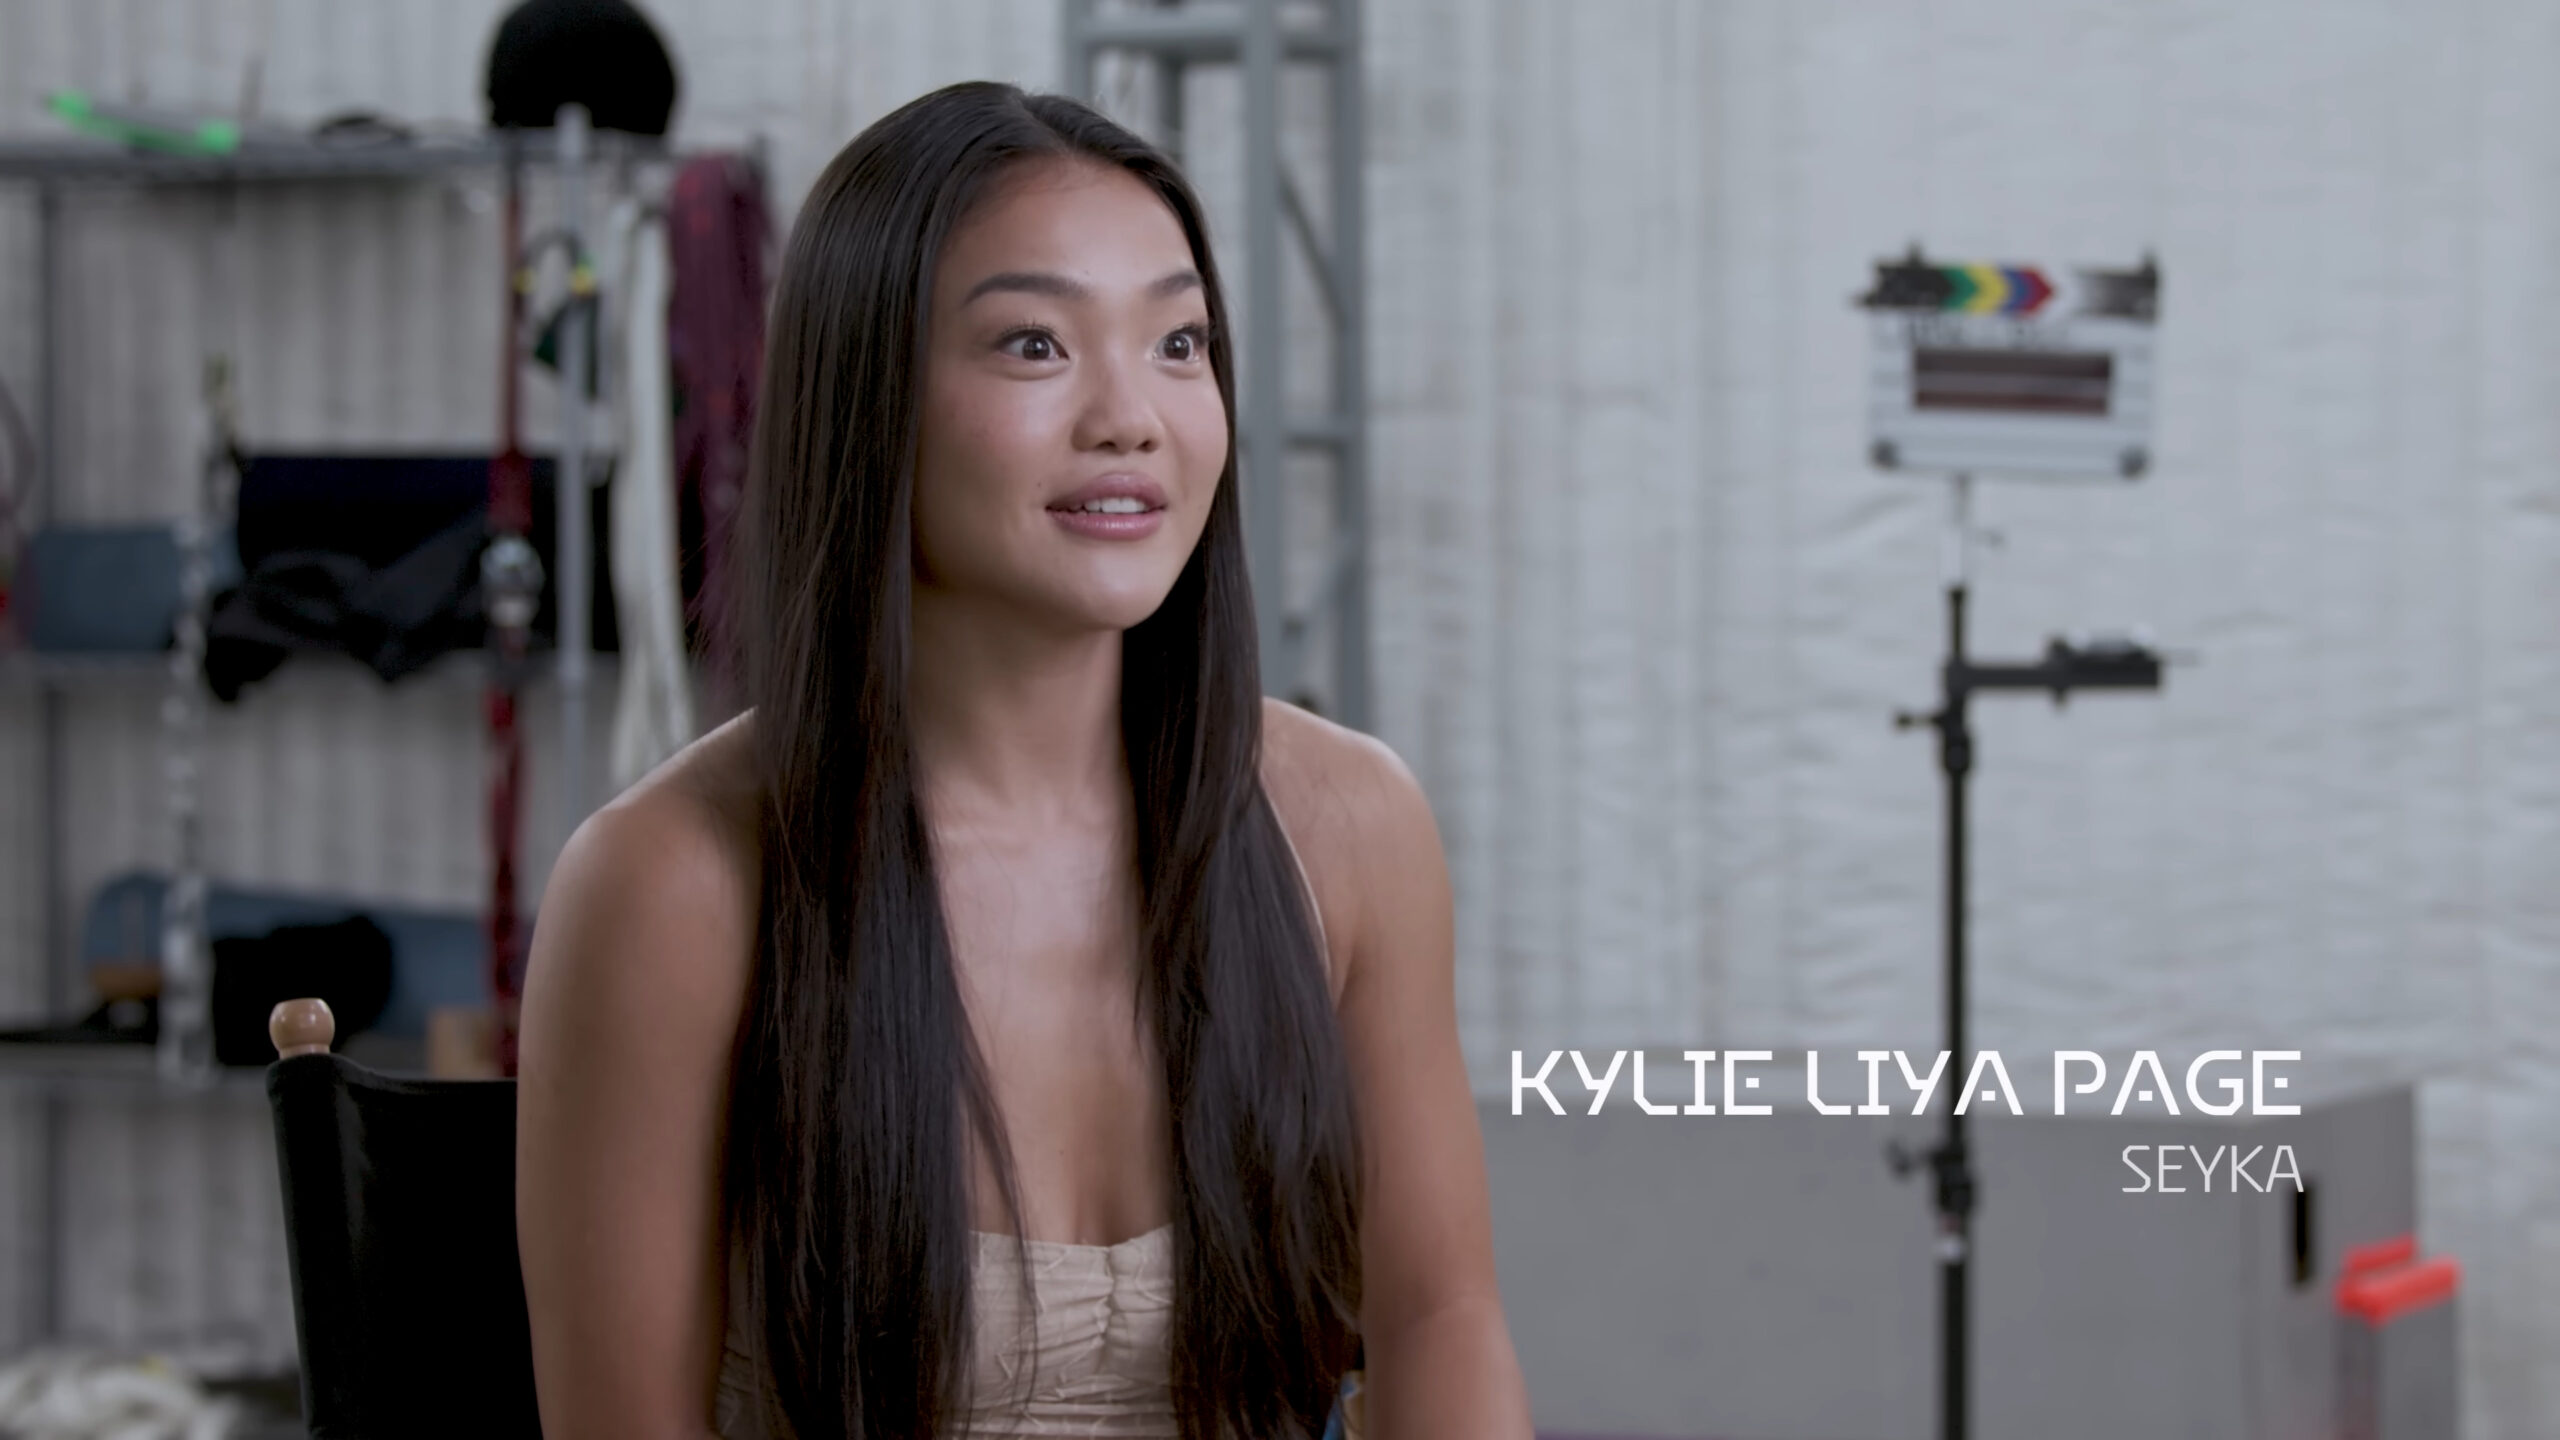 Kylie Lia Page recalls her experience working on Horizon Forbidden West: Burning Shores (2023), Guerilla Games